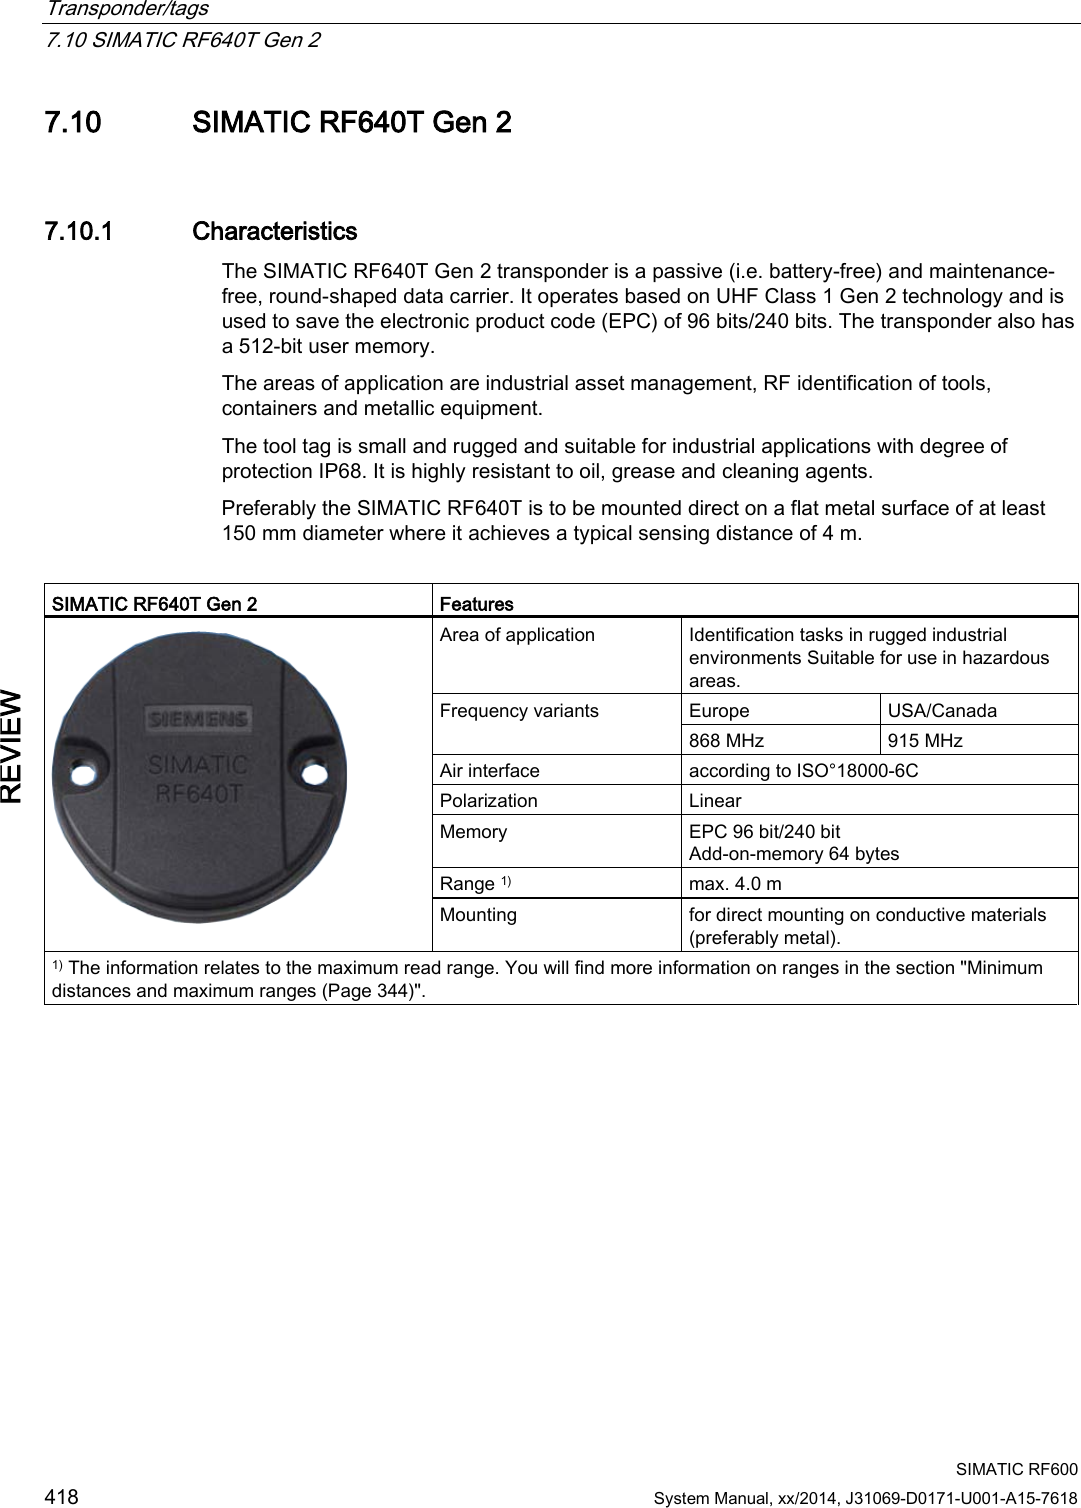 Transponder/tags   7.10 SIMATIC RF640T Gen 2  SIMATIC RF600 418 System Manual, xx/2014, J31069-D0171-U001-A15-7618 REVIEW 7.10 SIMATIC RF640T Gen 2 7.10.1 Characteristics The SIMATIC RF640T Gen 2 transponder is a passive (i.e. battery-free) and maintenance-free, round-shaped data carrier. It operates based on UHF Class 1 Gen 2 technology and is used to save the electronic product code (EPC) of 96 bits/240 bits. The transponder also has a 512-bit user memory. The areas of application are industrial asset management, RF identification of tools, containers and metallic equipment.  The tool tag is small and rugged and suitable for industrial applications with degree of protection IP68. It is highly resistant to oil, grease and cleaning agents.  Preferably the SIMATIC RF640T is to be mounted direct on a flat metal surface of at least 150 mm diameter where it achieves a typical sensing distance of 4 m.  SIMATIC RF640T Gen 2 Features  Area of application Identification tasks in rugged industrial environments Suitable for use in hazardous areas. Frequency variants Europe USA/Canada 868 MHz 915 MHz Air interface according to ISO°18000-6C Polarization  Linear Memory EPC 96 bit/240 bit Add-on-memory 64 bytes Range 1) max. 4.0 m Mounting for direct mounting on conductive materials (preferably metal). 1) The information relates to the maximum read range. You will find more information on ranges in the section &quot;Minimum distances and maximum ranges (Page 344)&quot;.  